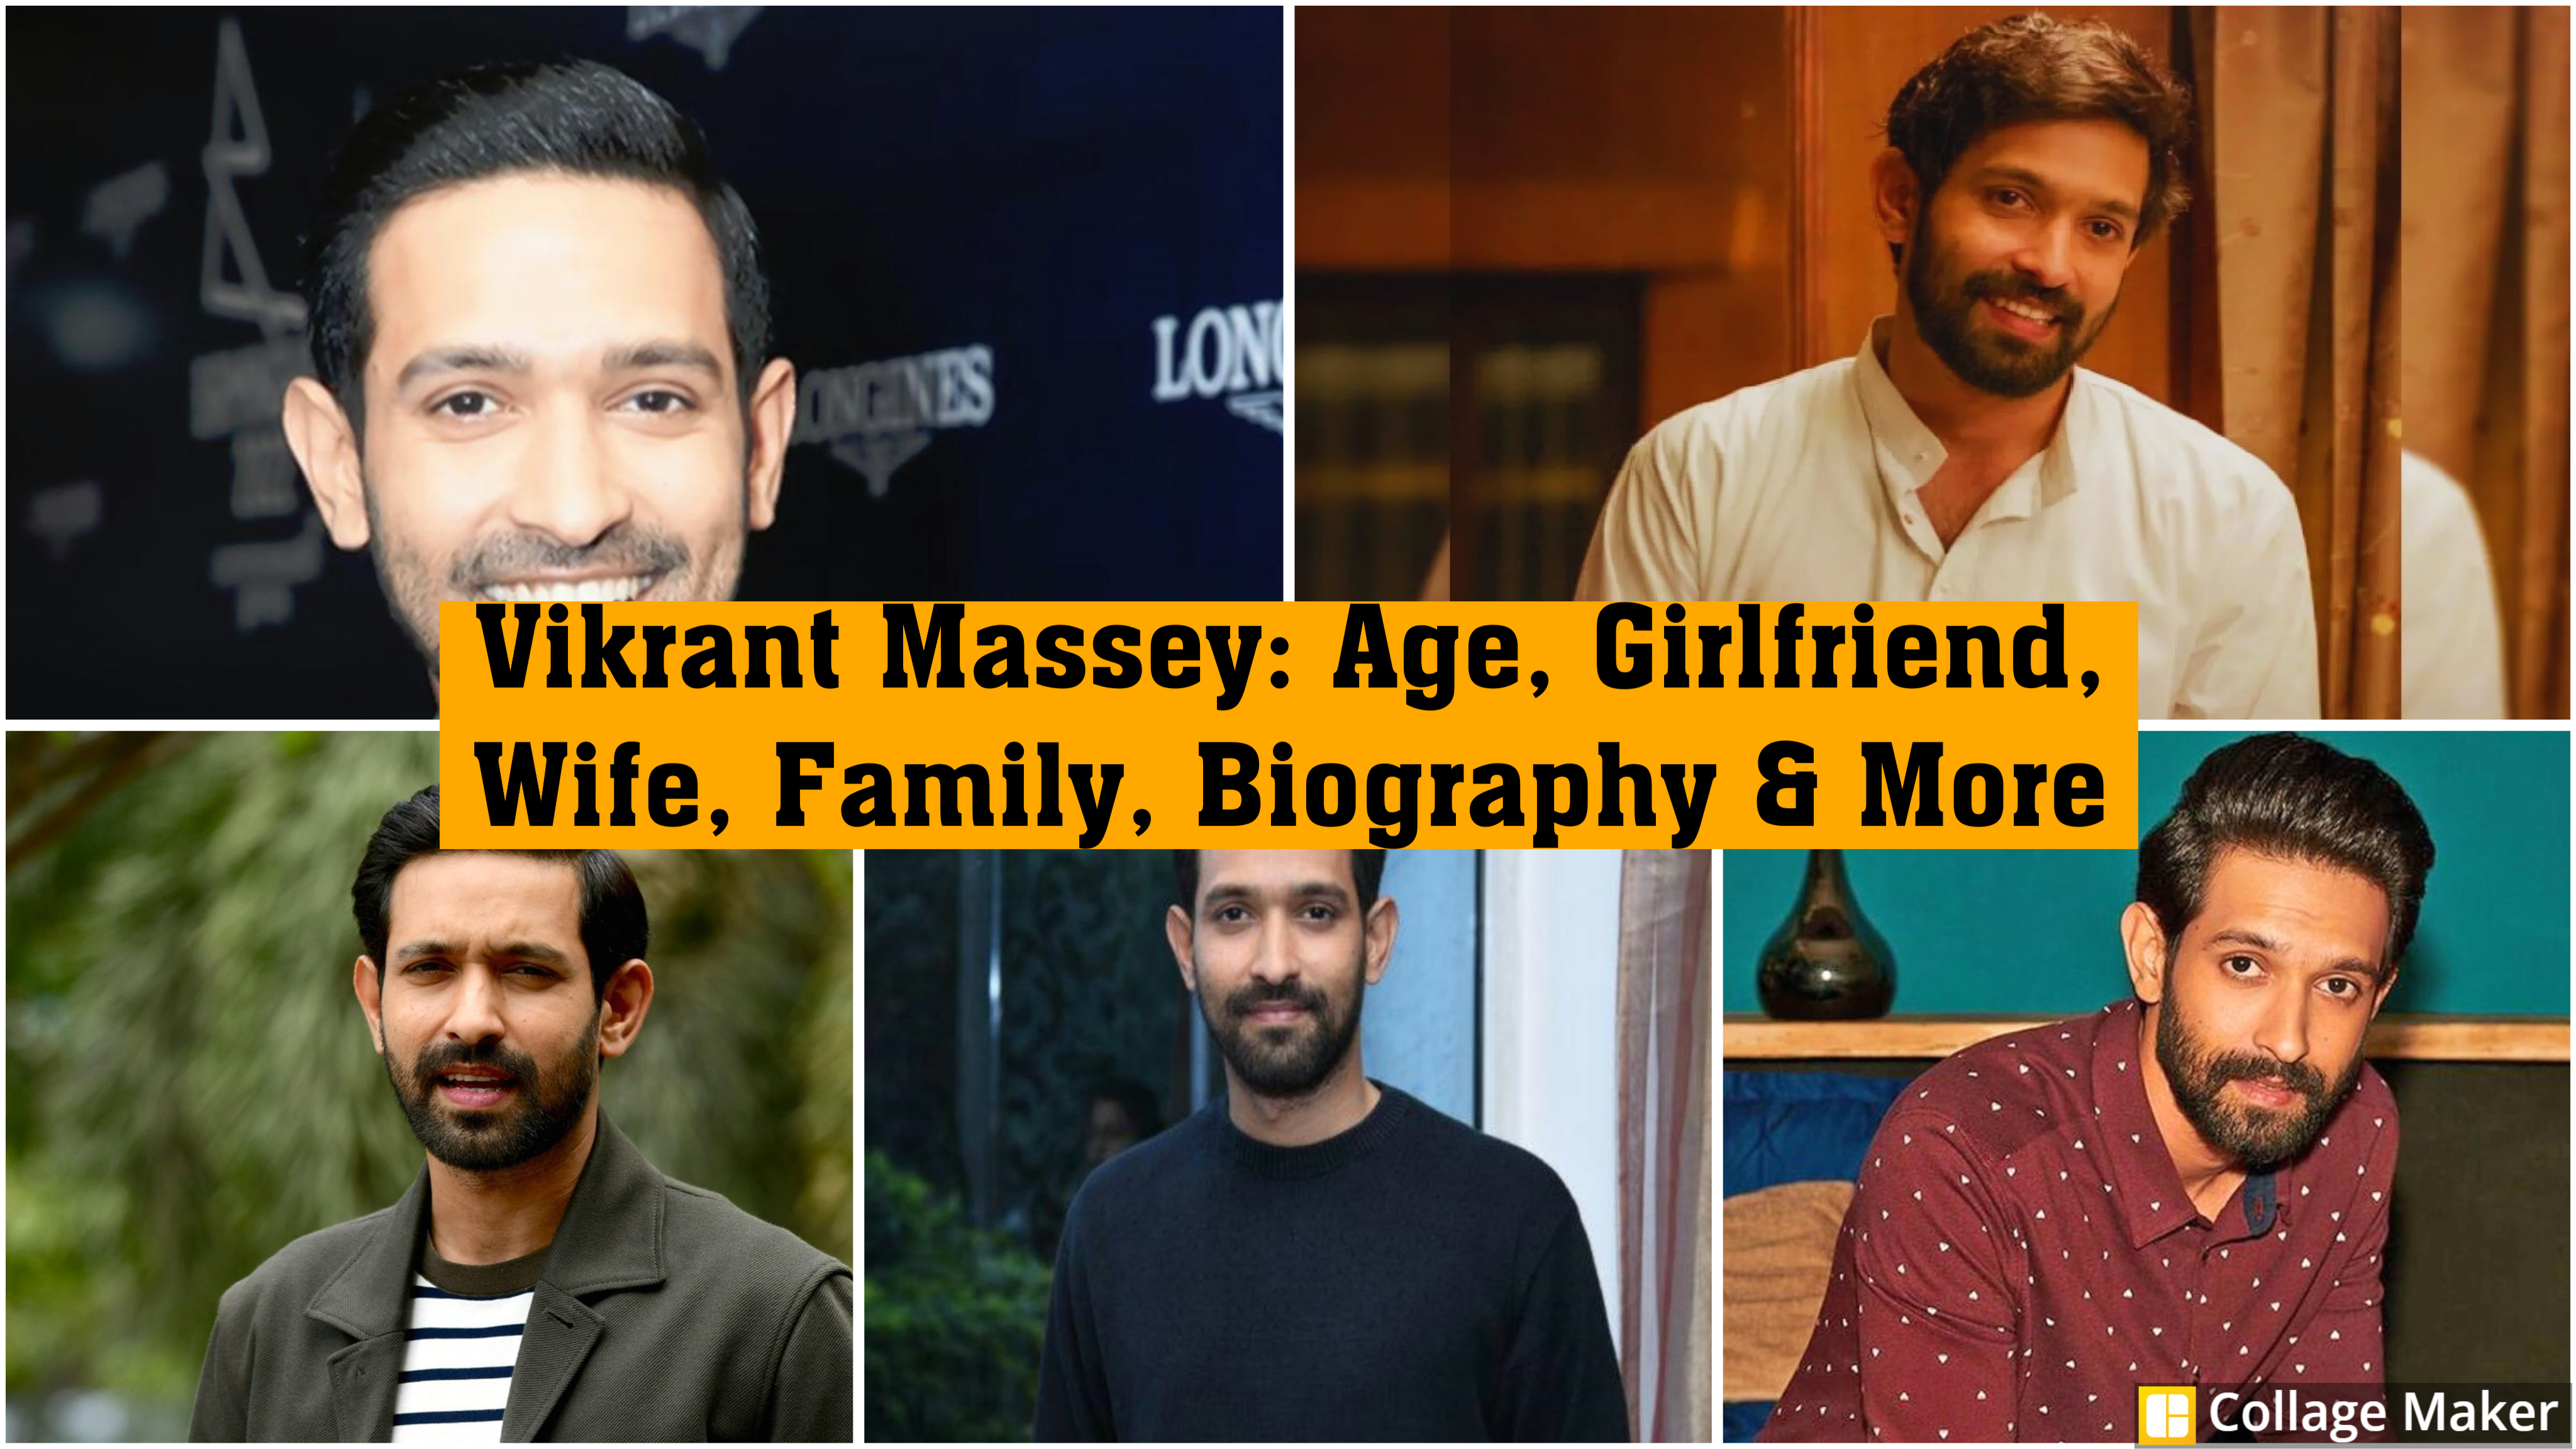 You are currently viewing Vikrant Massey: Age, Girlfriend, Wife, Family, Biography & More